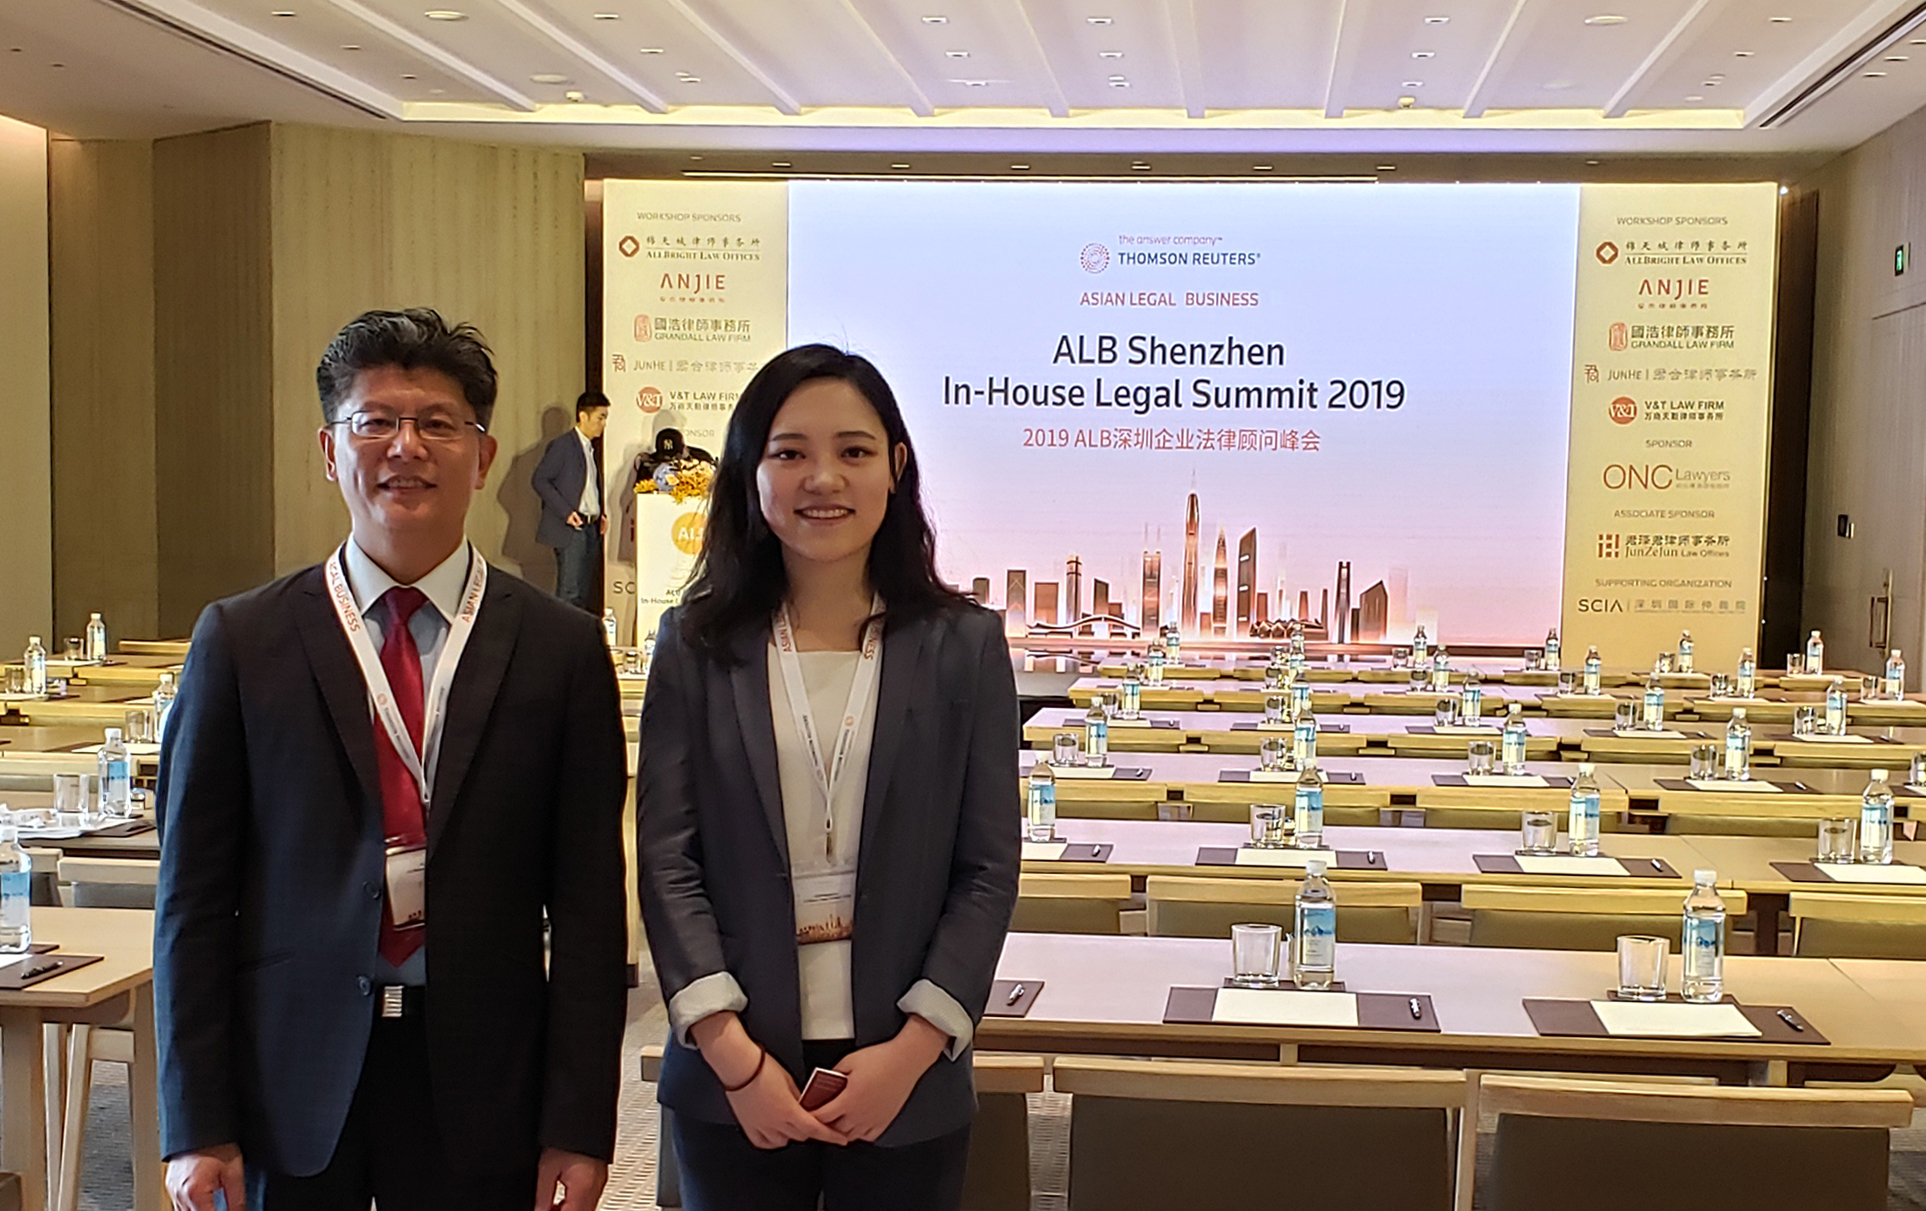 ONC Lawyers sponsored the Shenzhen In-house Legal Summit 2019 of Asian Legal Business